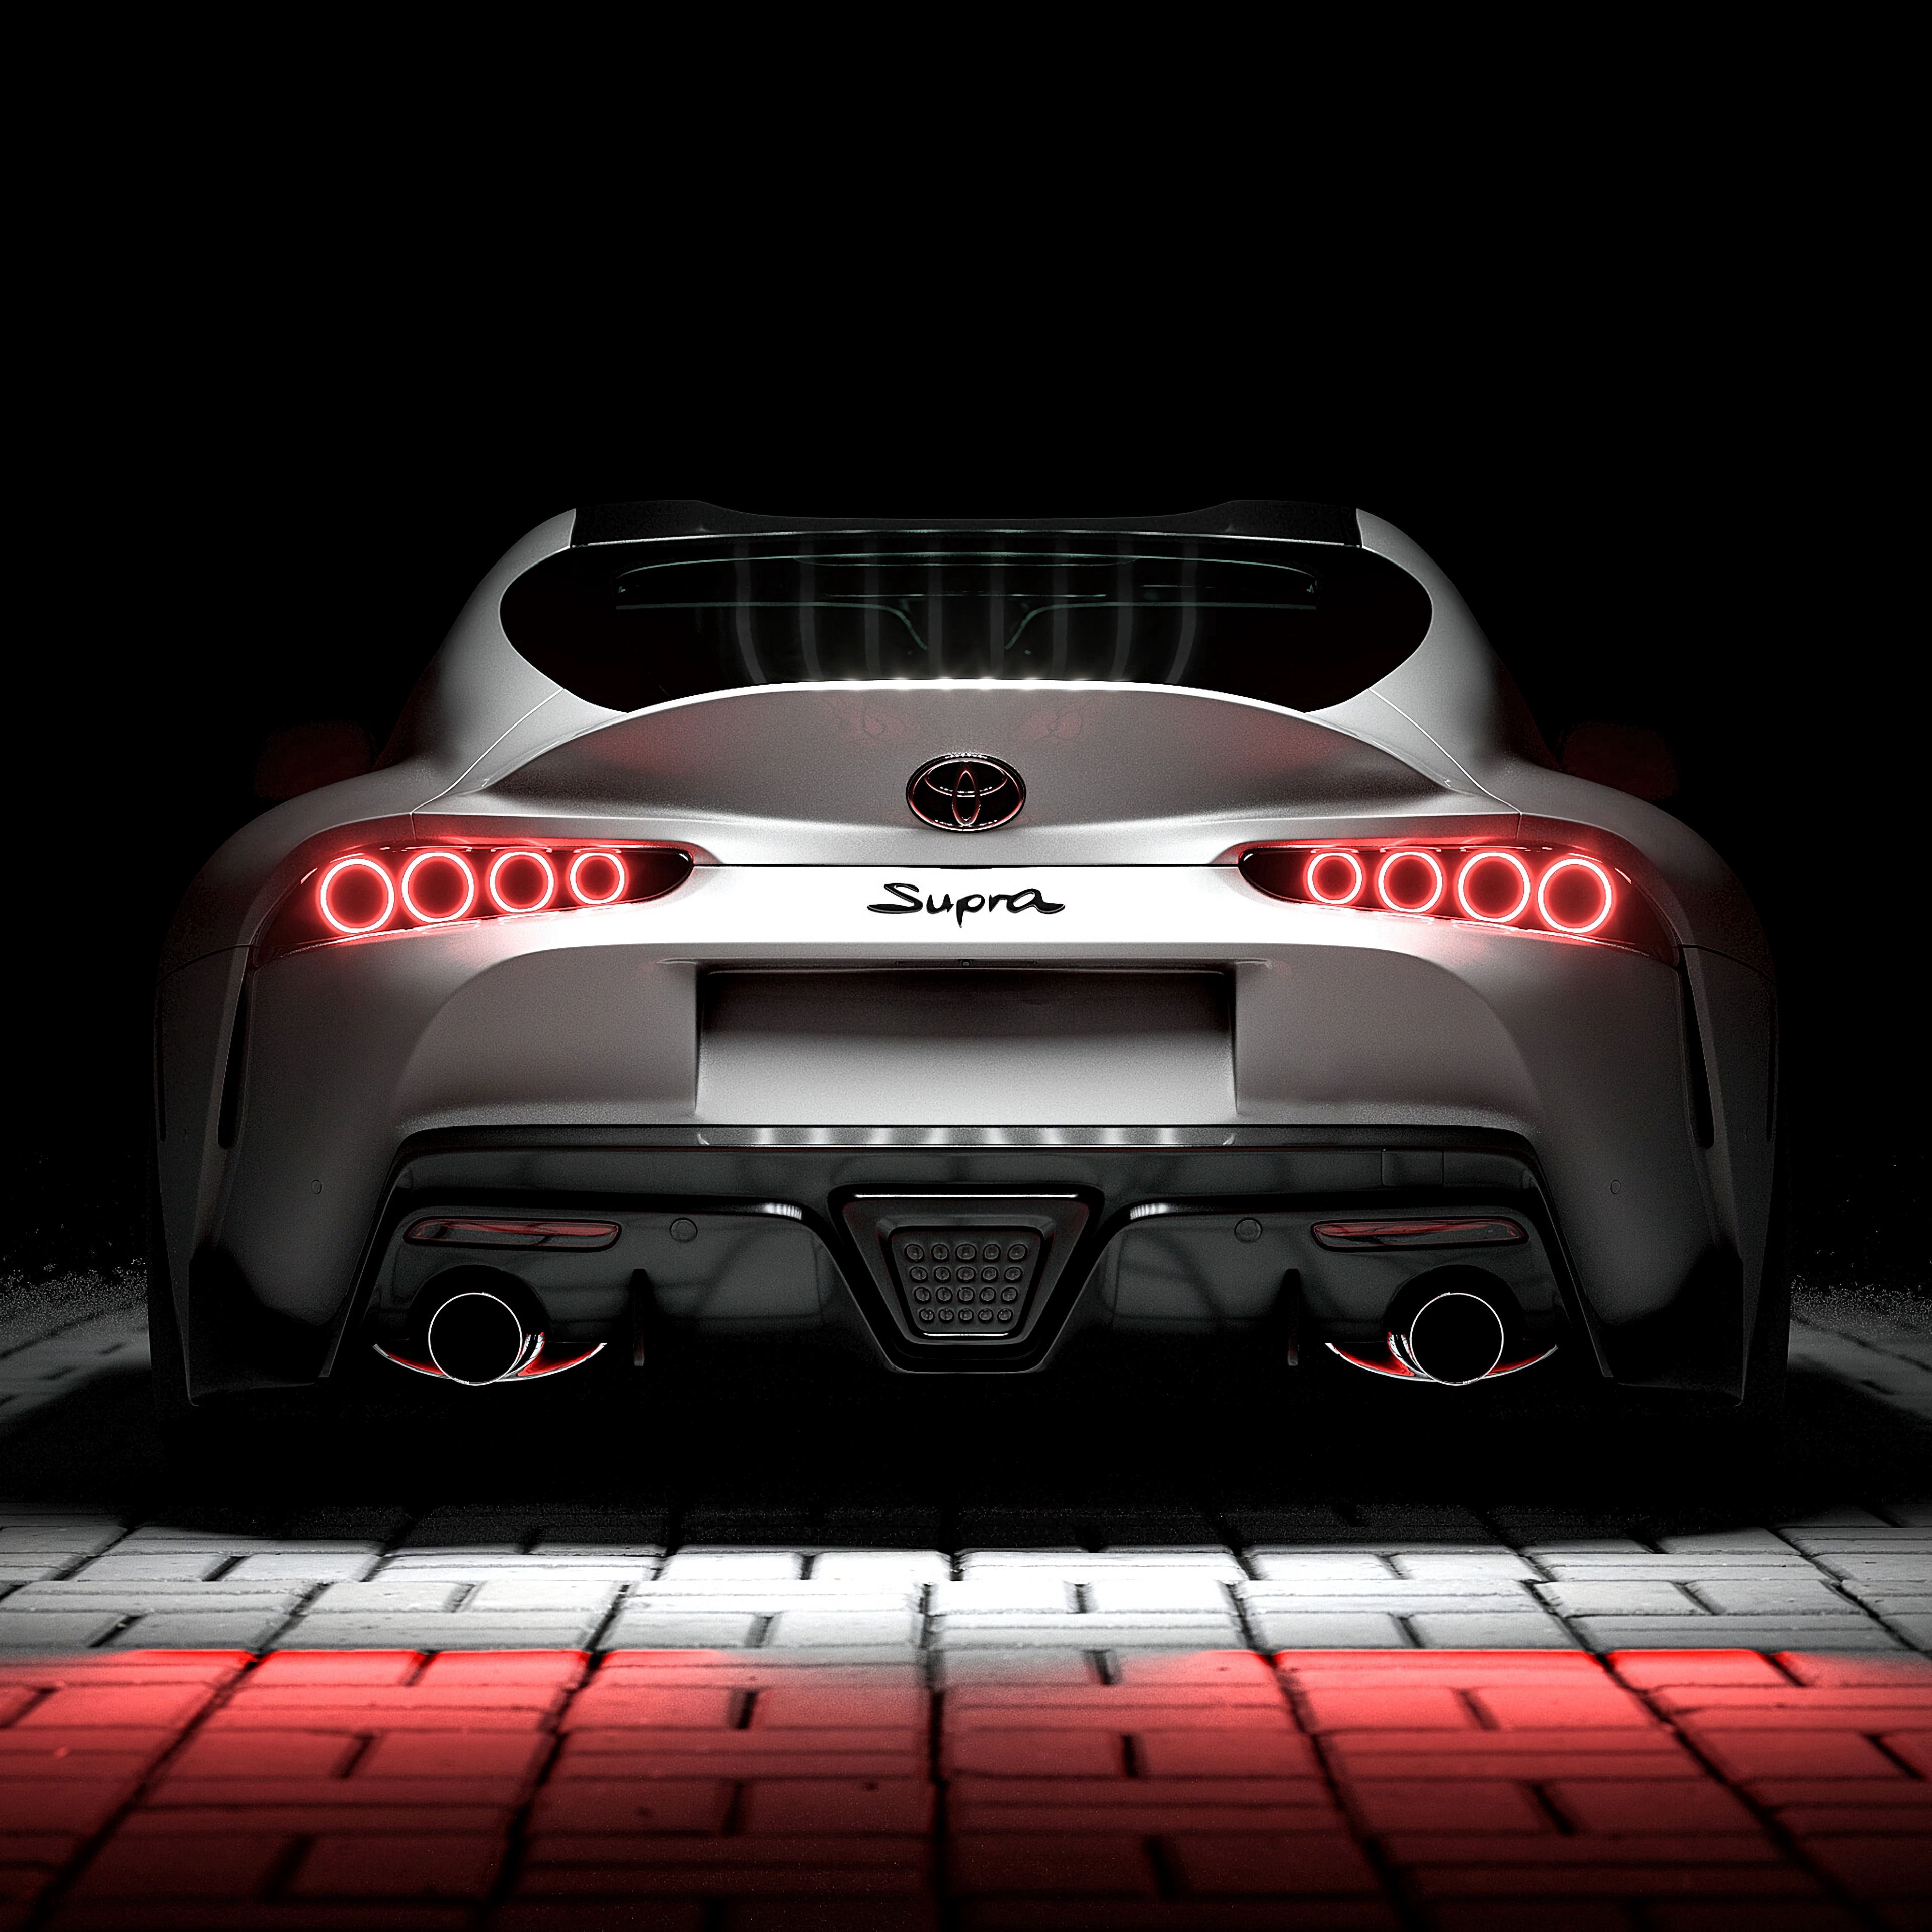 sports, toyota, cars, white, backlight, illumination, sports car, back view, rear view, toyota supra iphone wallpaper